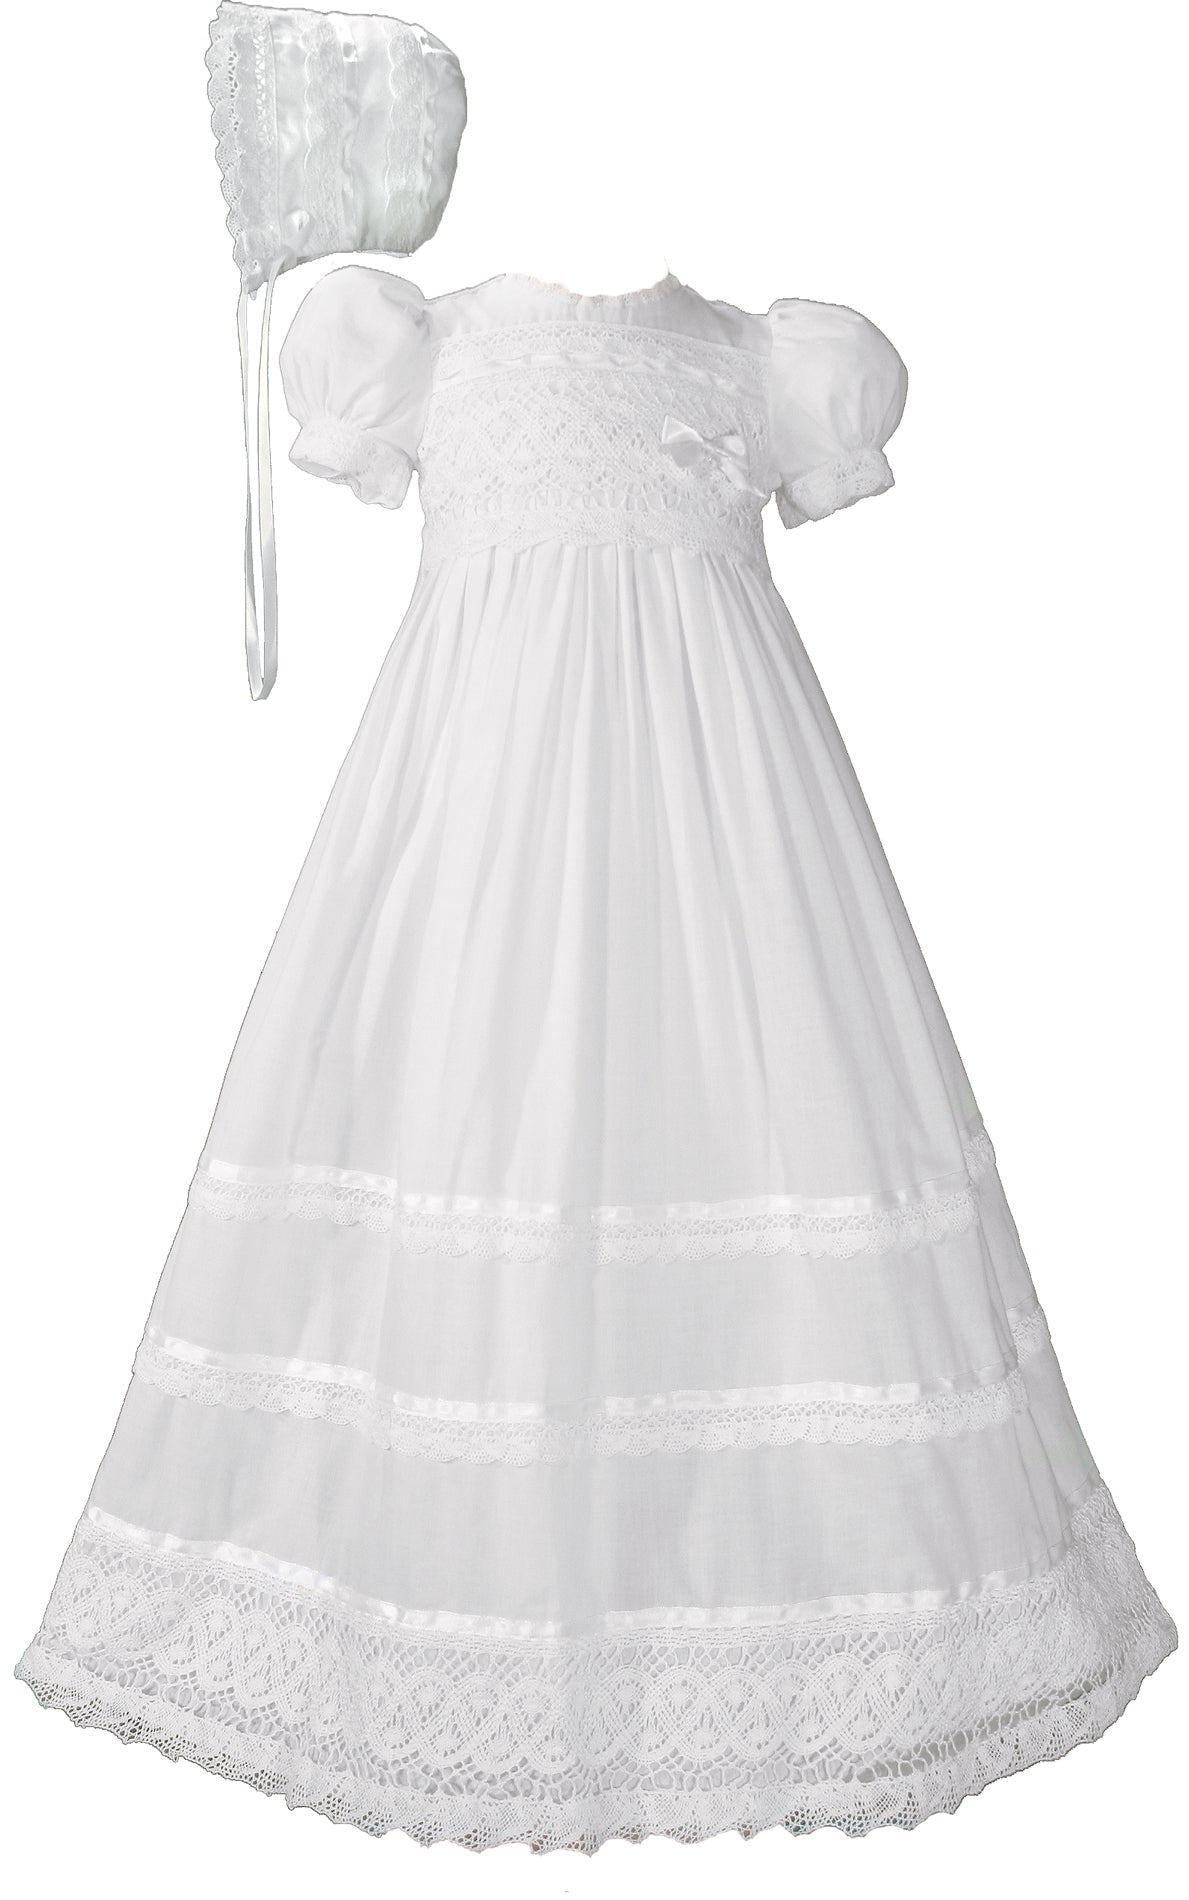 Soft Tulle Christening Gown For Baby Girls 2021 Short Sleeve Appliques Lace Baptism  Gown With Bonnet For First Communion From Greatvip, $59.59 | DHgate.Com